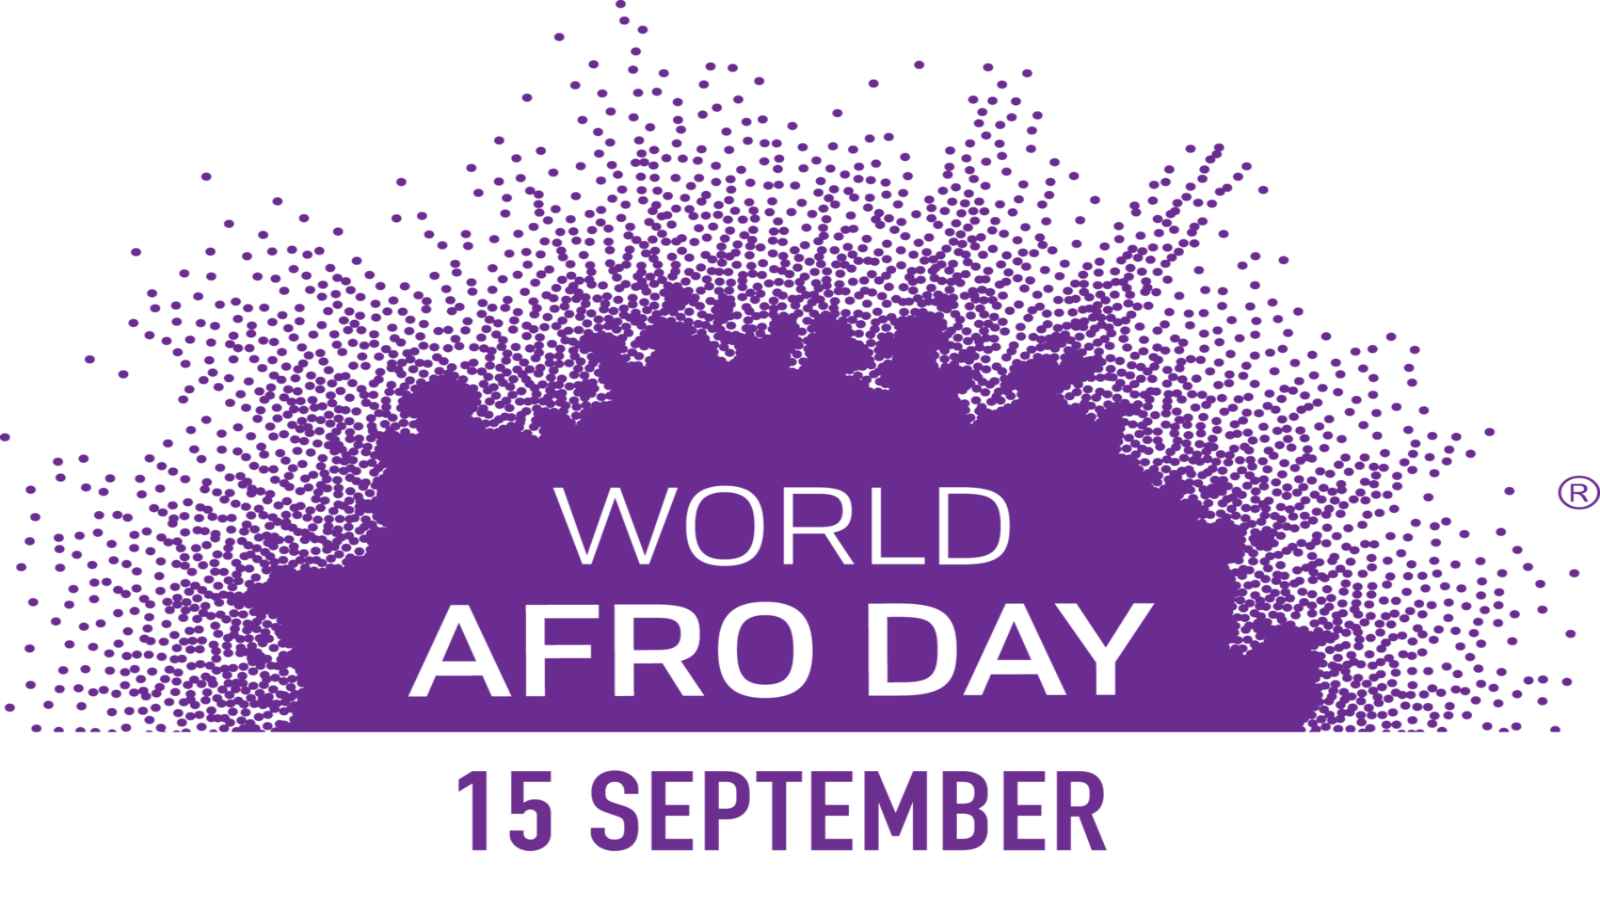 World Afro Day 2022: Date, History and all you need to know